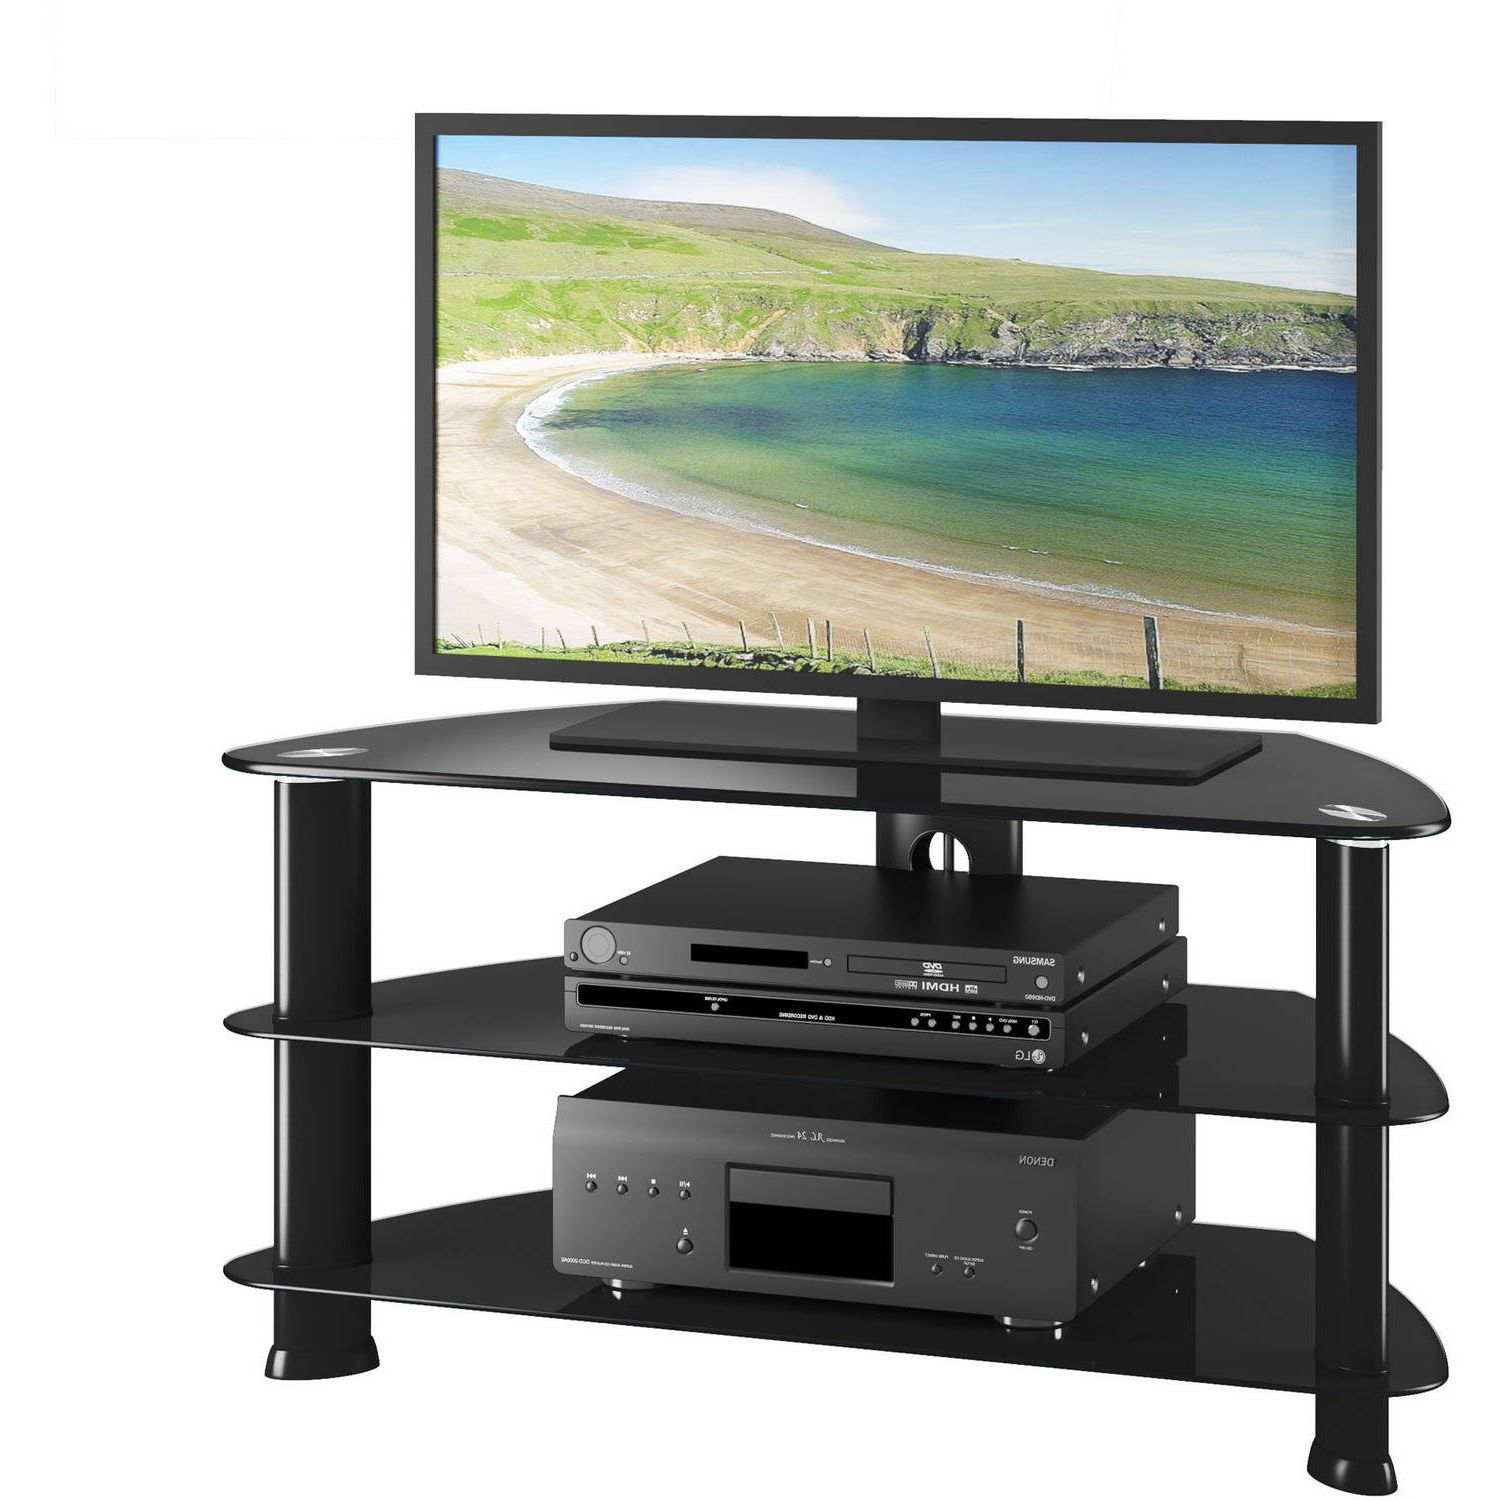 Laguna Satin Black Corner Tv Stand For Tvs Up To 50 With Tv Stands For Tvs Up To 50" (View 13 of 20)